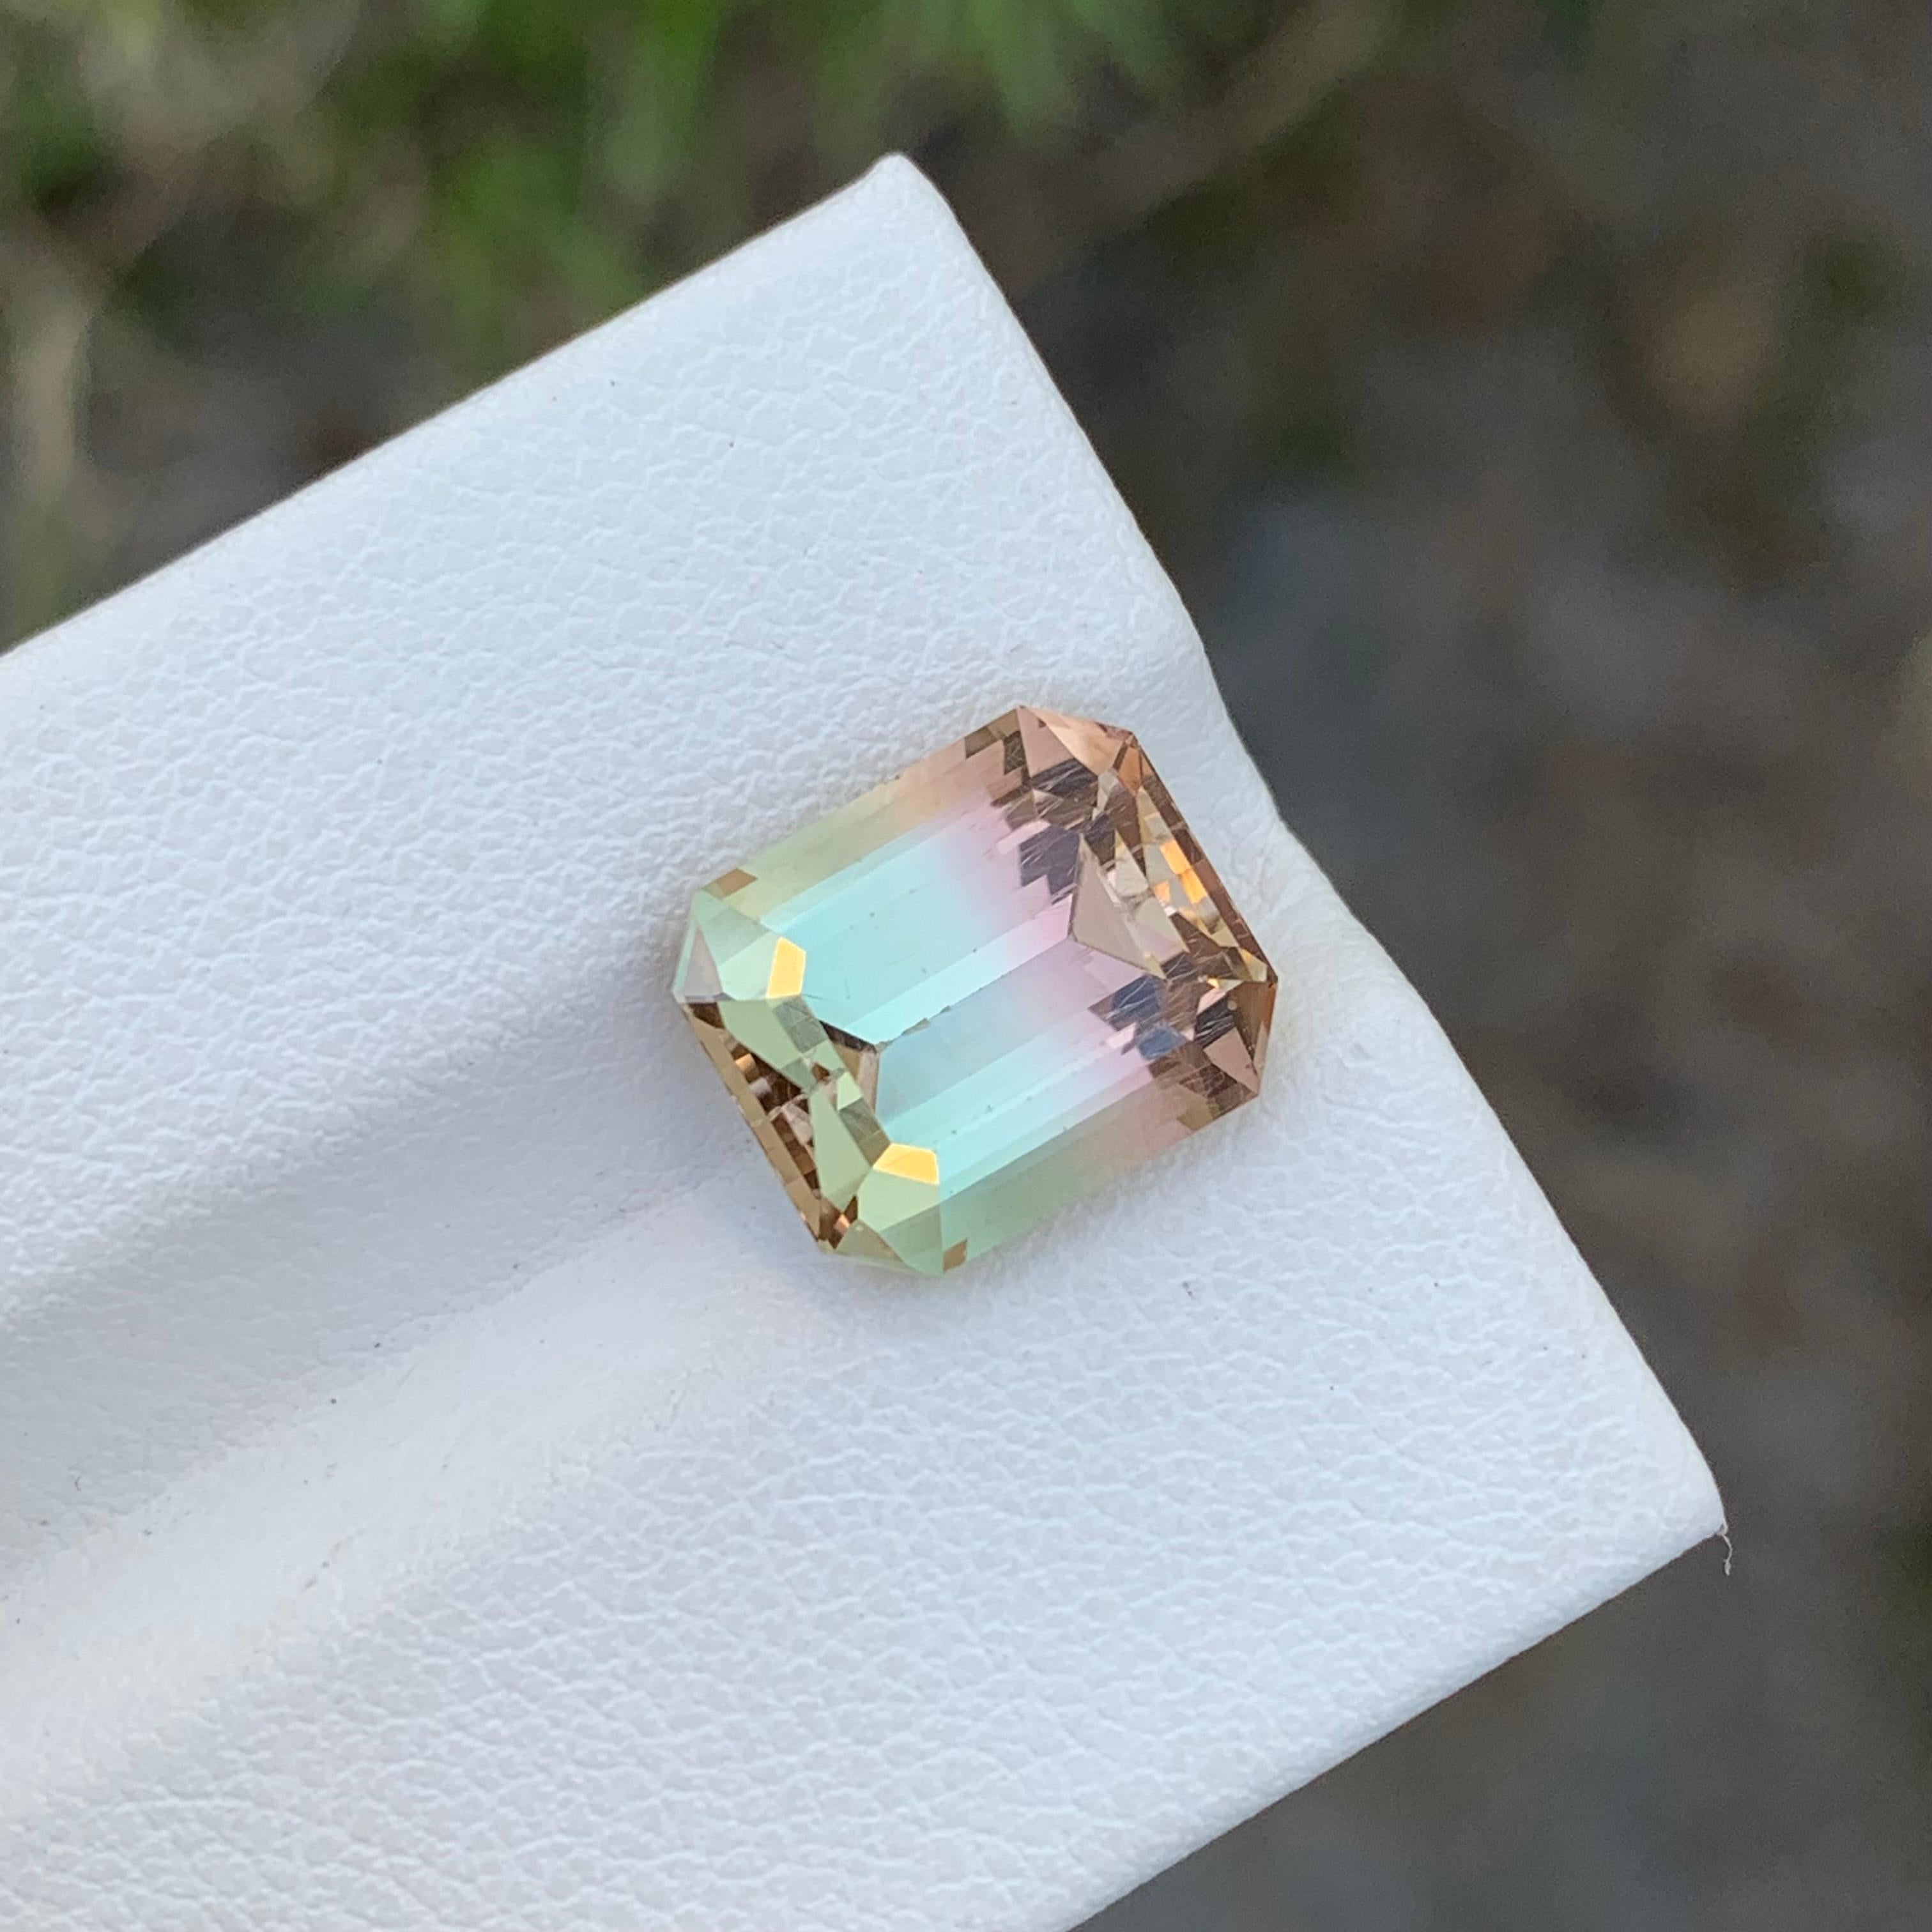 Loose Bi Colour Tourmaline

Weight: 5.85 Carats
Dimension: 1.1 x 9.5 x 6.9 Mm
Colour: Peach Pink And Mint Green 
Origin: Afghanistan
Certificate: On Demand
Treatment: Non

Tourmaline is a captivating gemstone known for its remarkable variety of